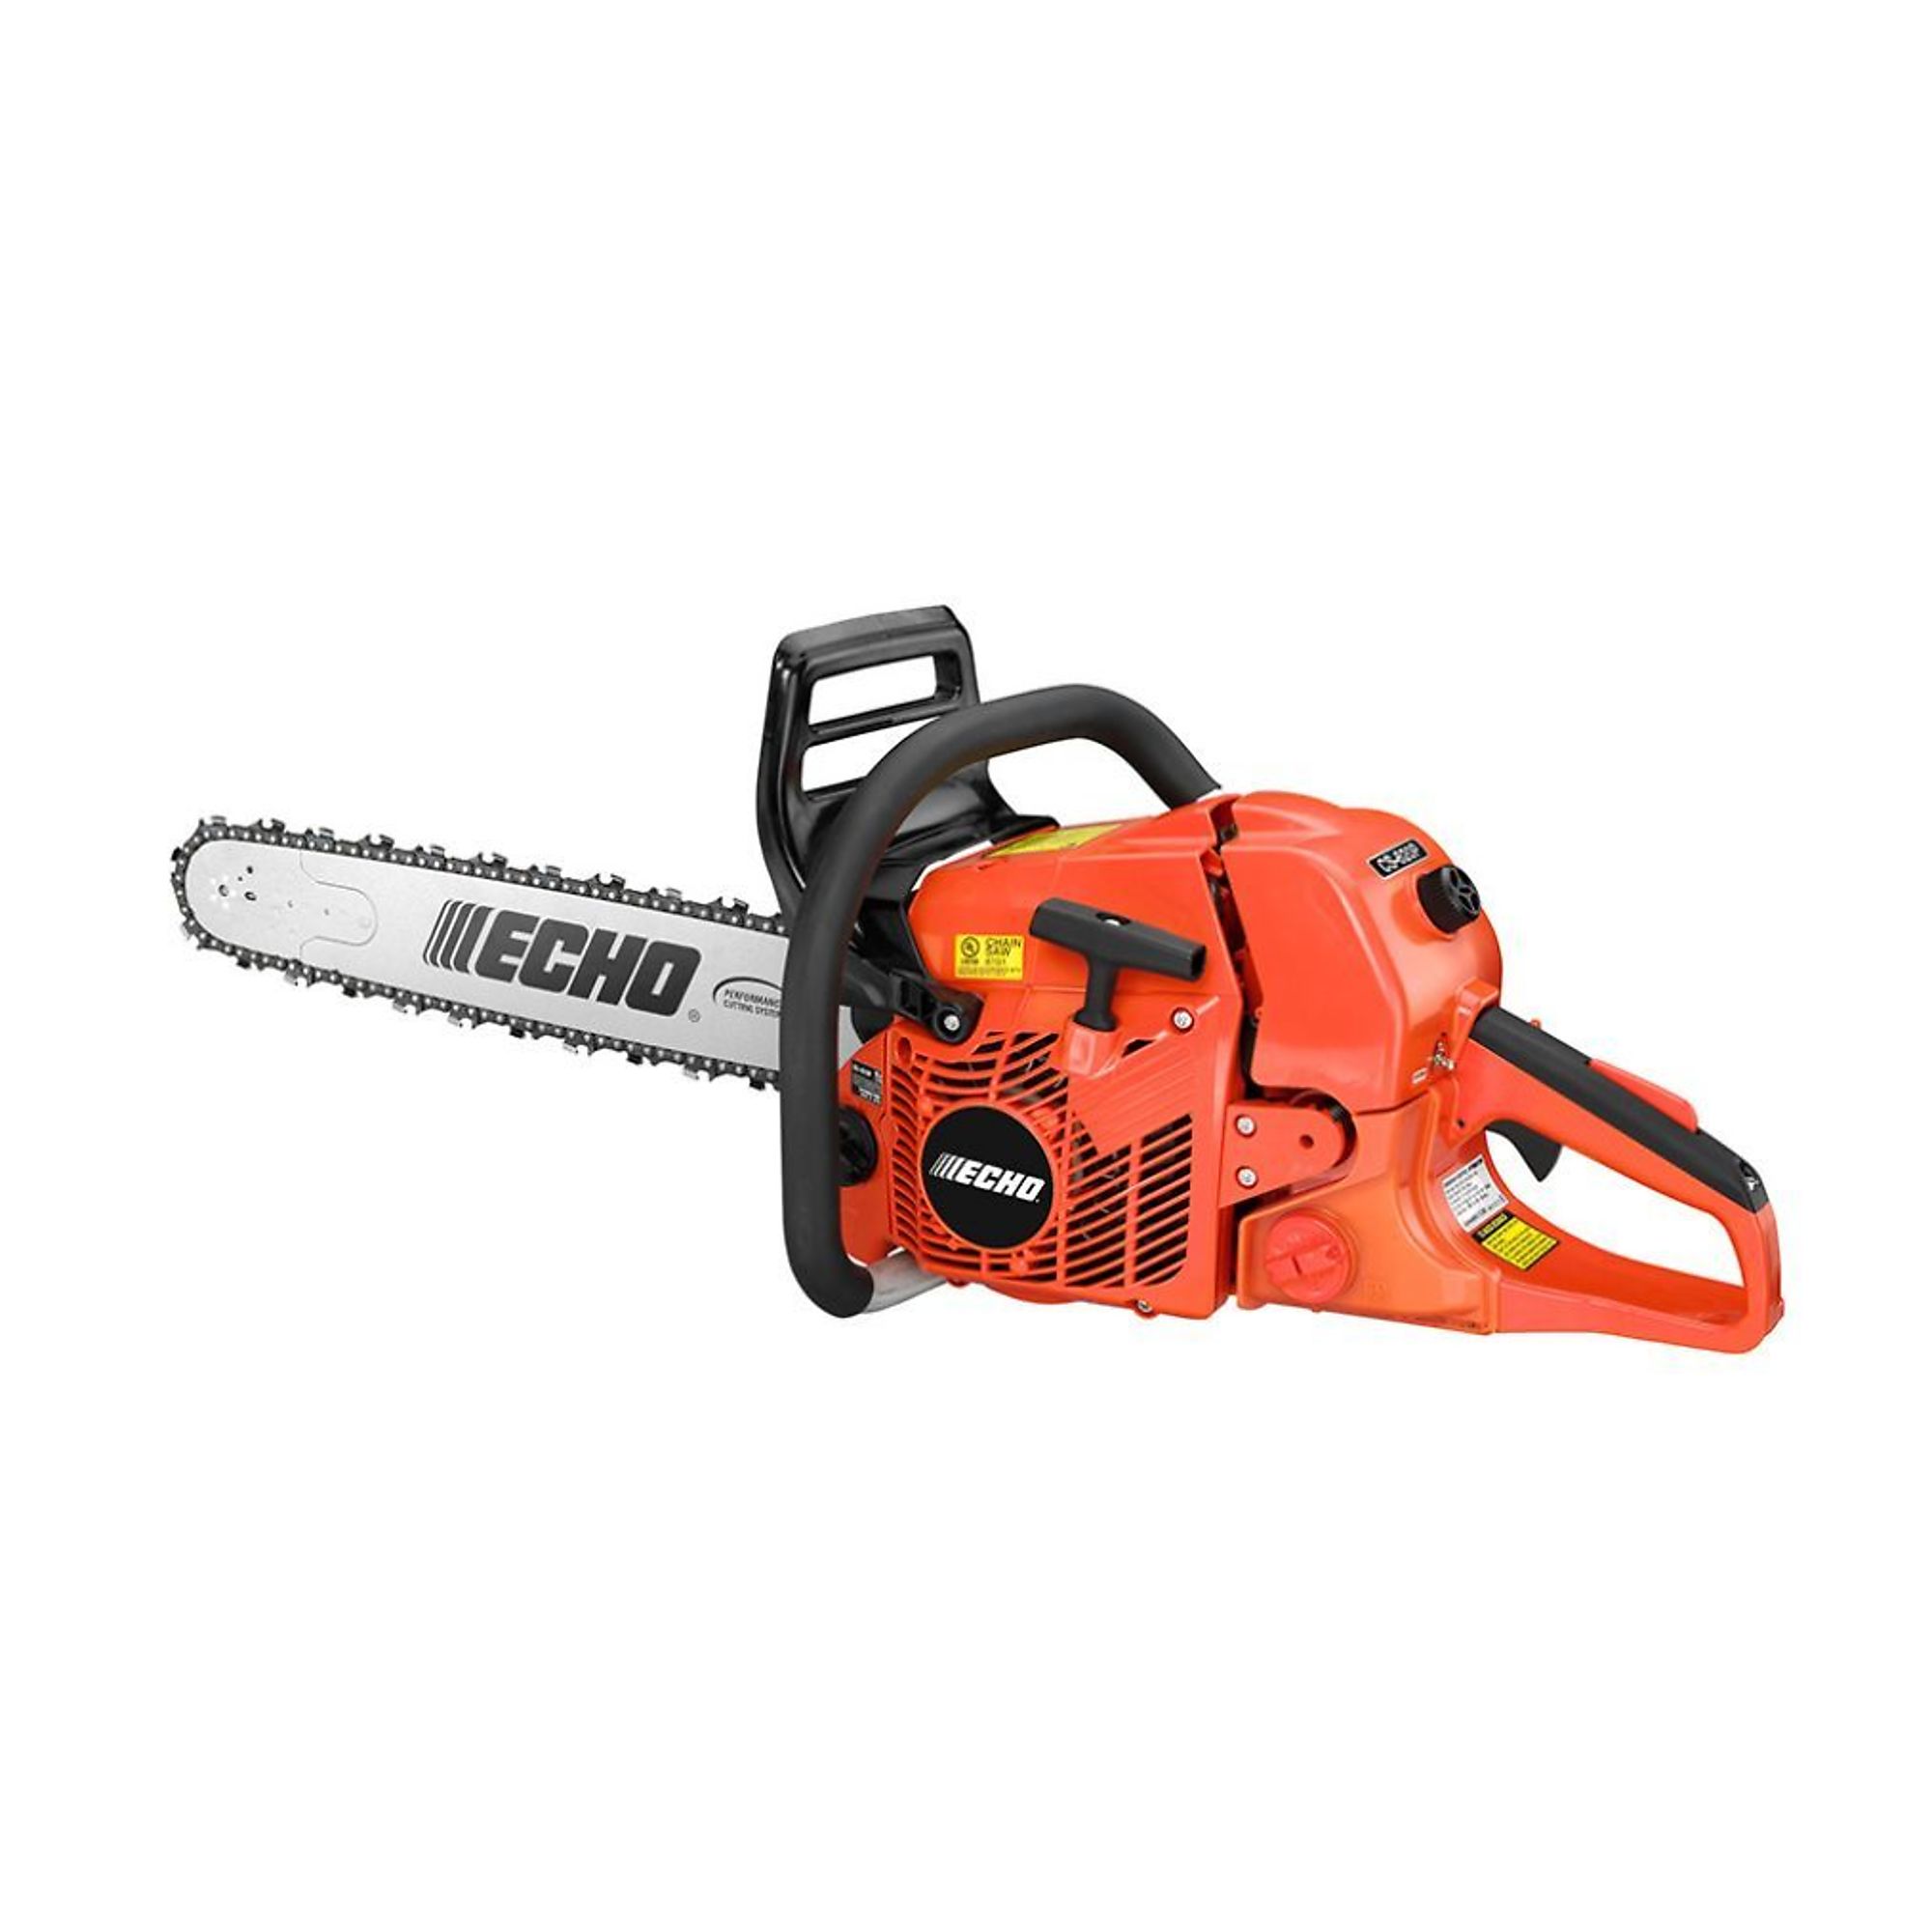 ECHO X Series, Gas-Powered Rear Handle Chainsaw, Bar Length 20 in, Engine Displacement 59.8 cc, Model CS-620P-20